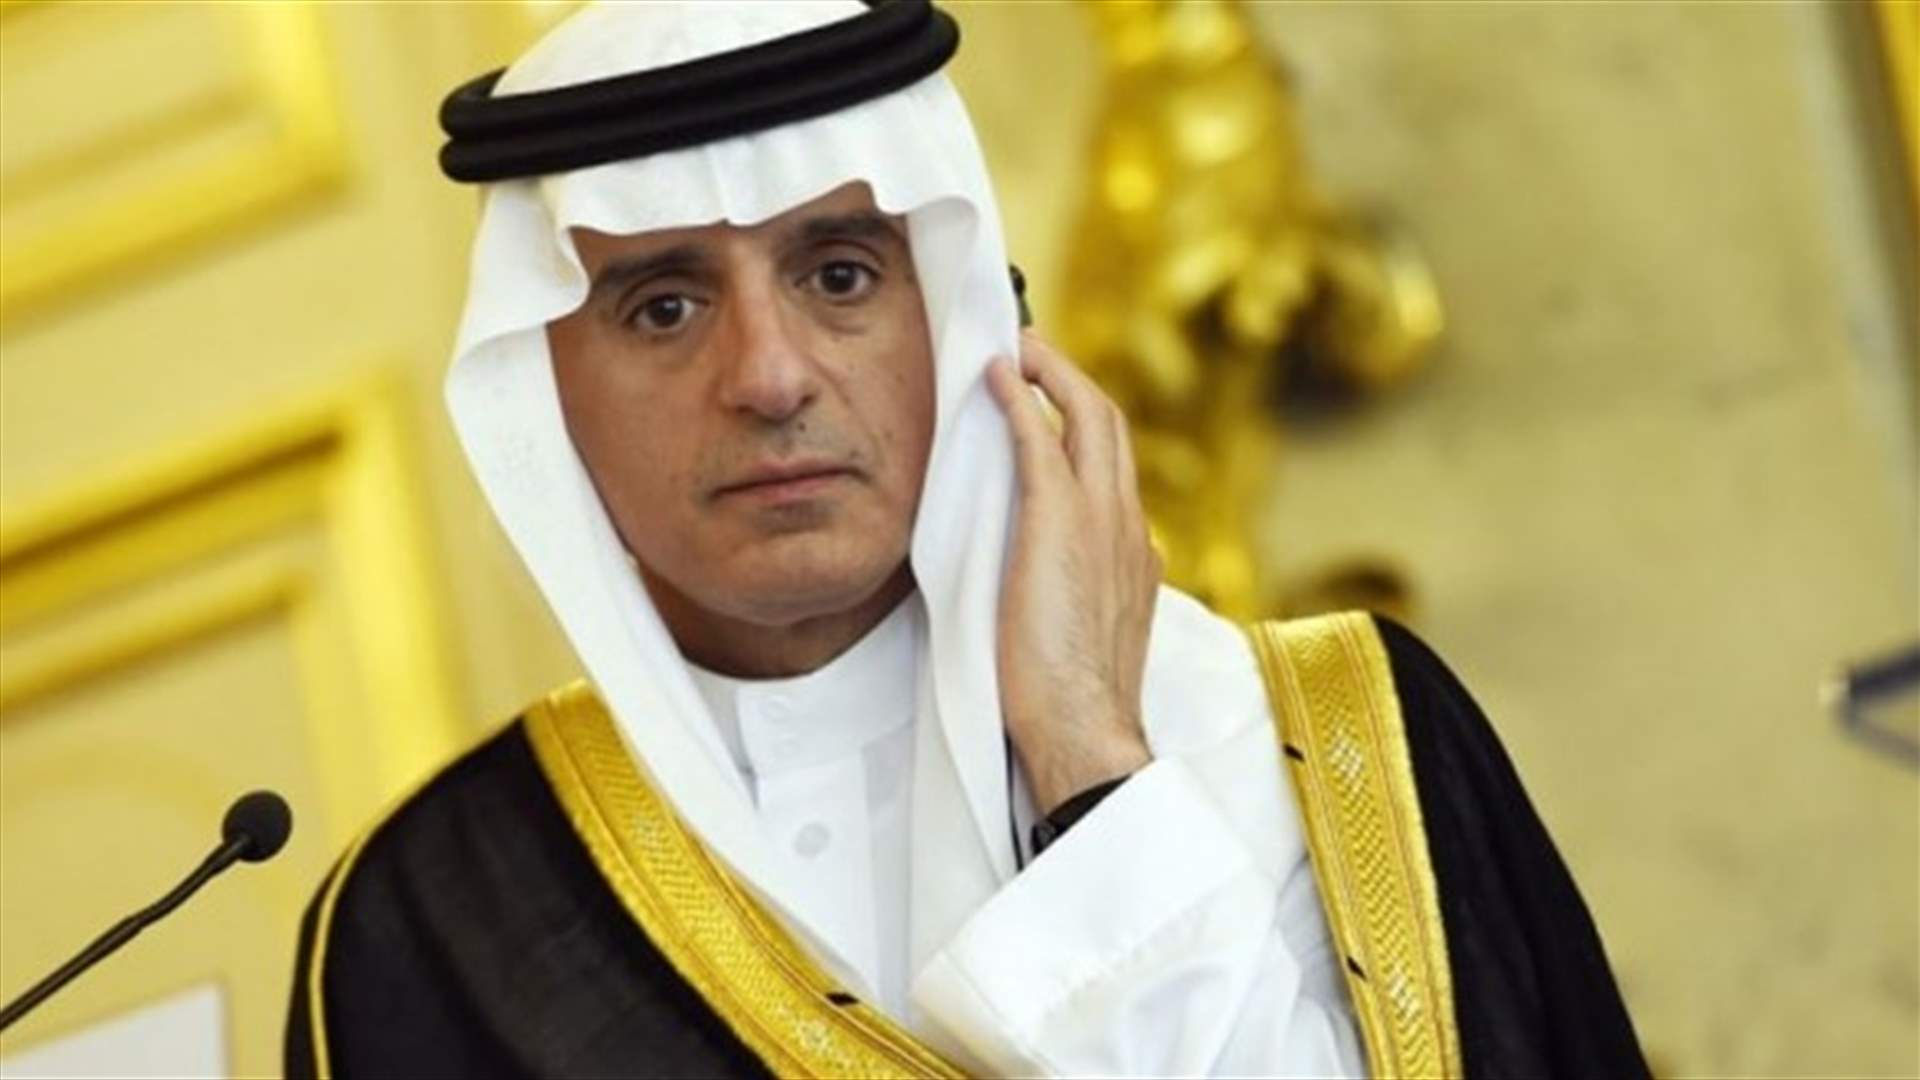 Saudi foreign minister optimistic about overcoming Mideast challenges